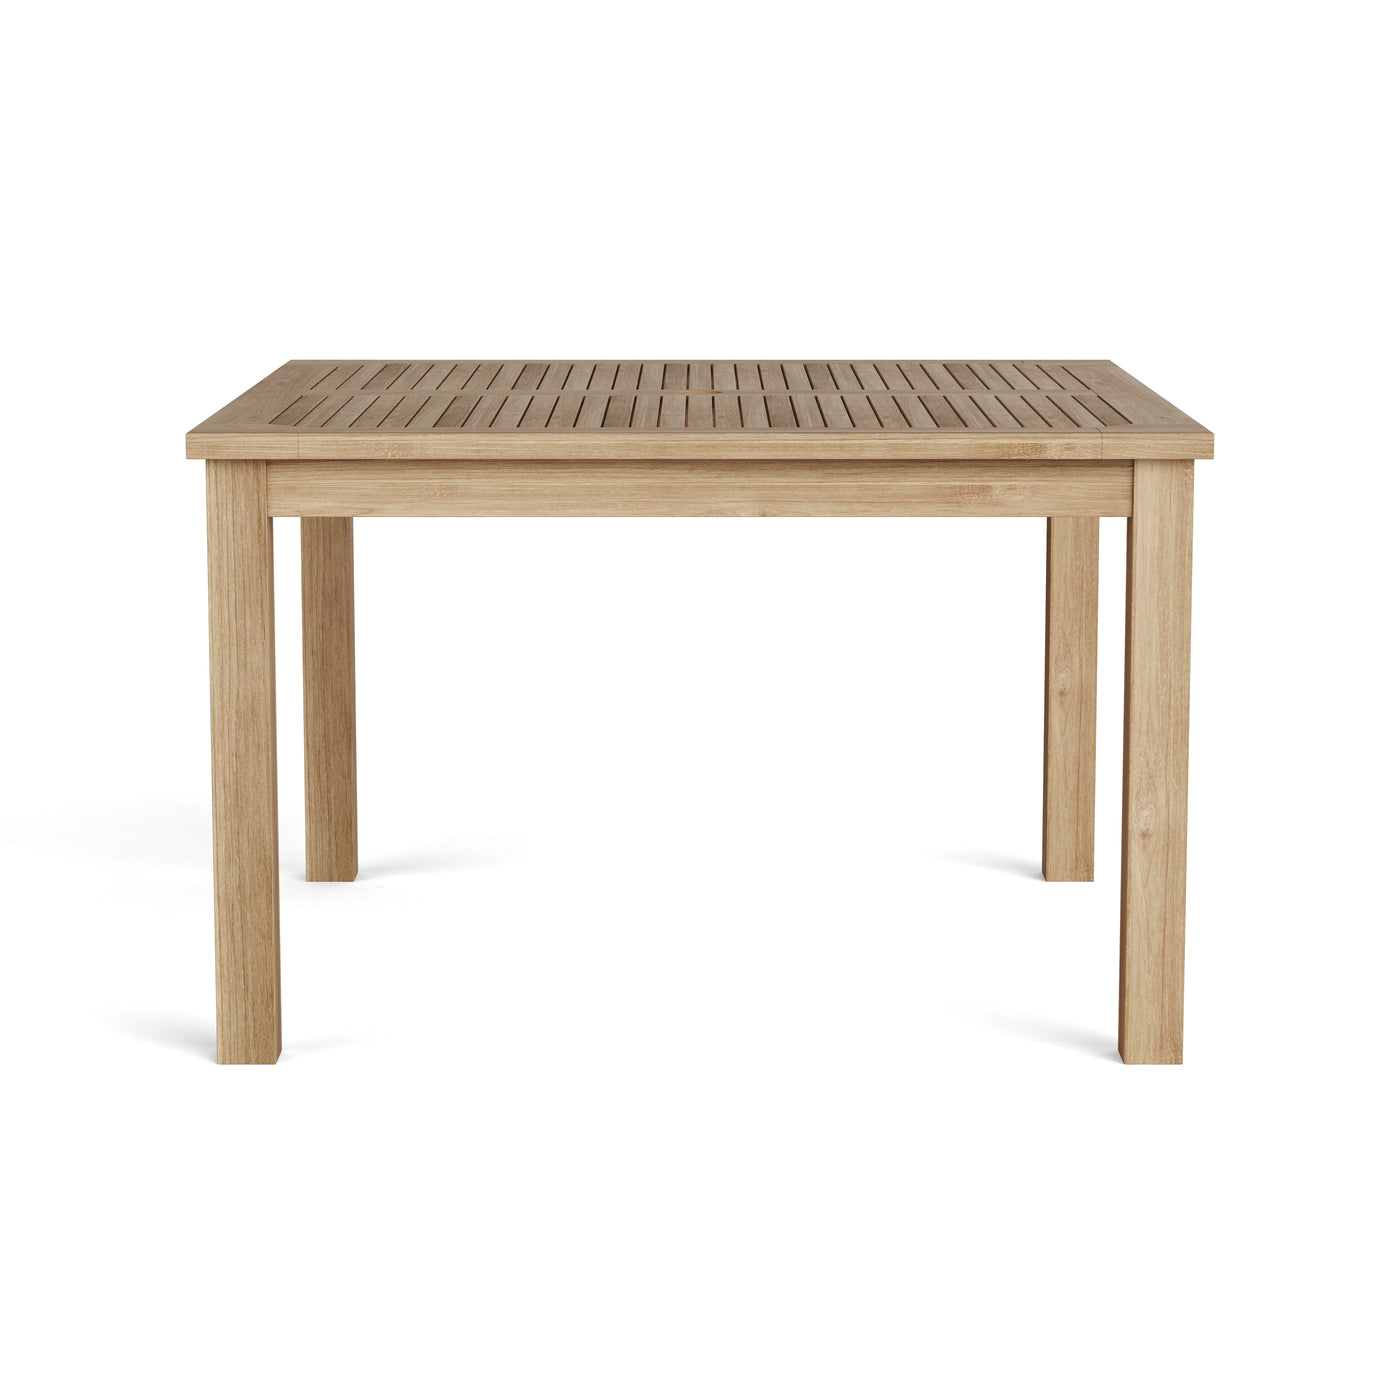 Windsor 47" Square Table